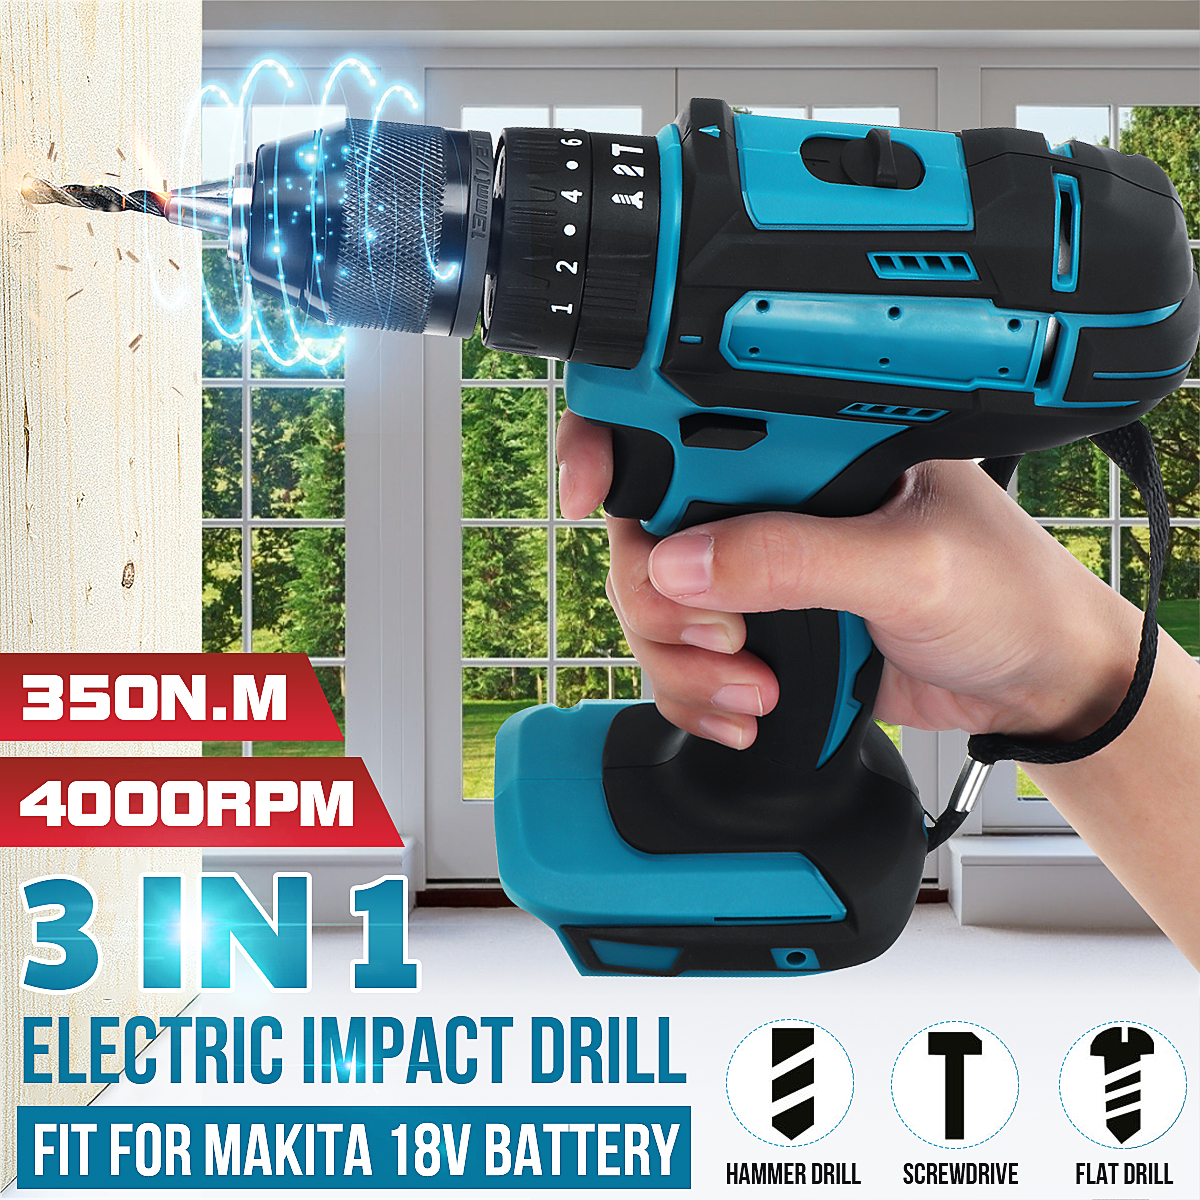 Drillpro-10mm-Chuck-Impact-Drill-350Nm-Cordless-Electric-Drill-For-Makita18V-Battery-4000RPM-LED-Lig-1642853-1